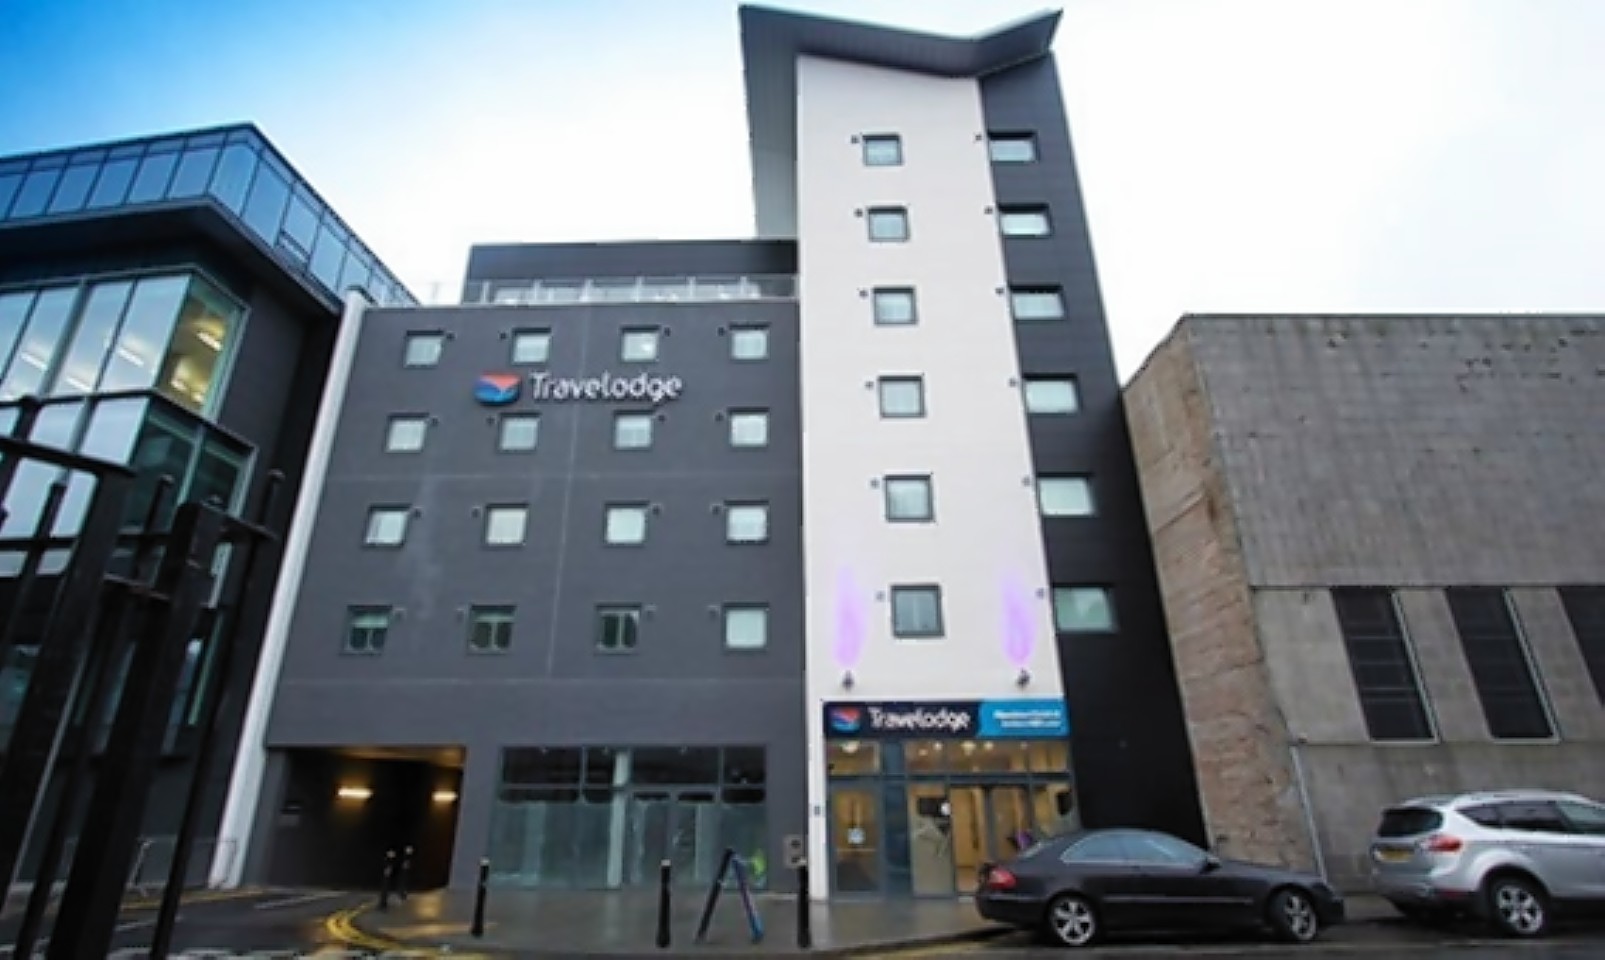 The Travelodge at Justice Mill Lane